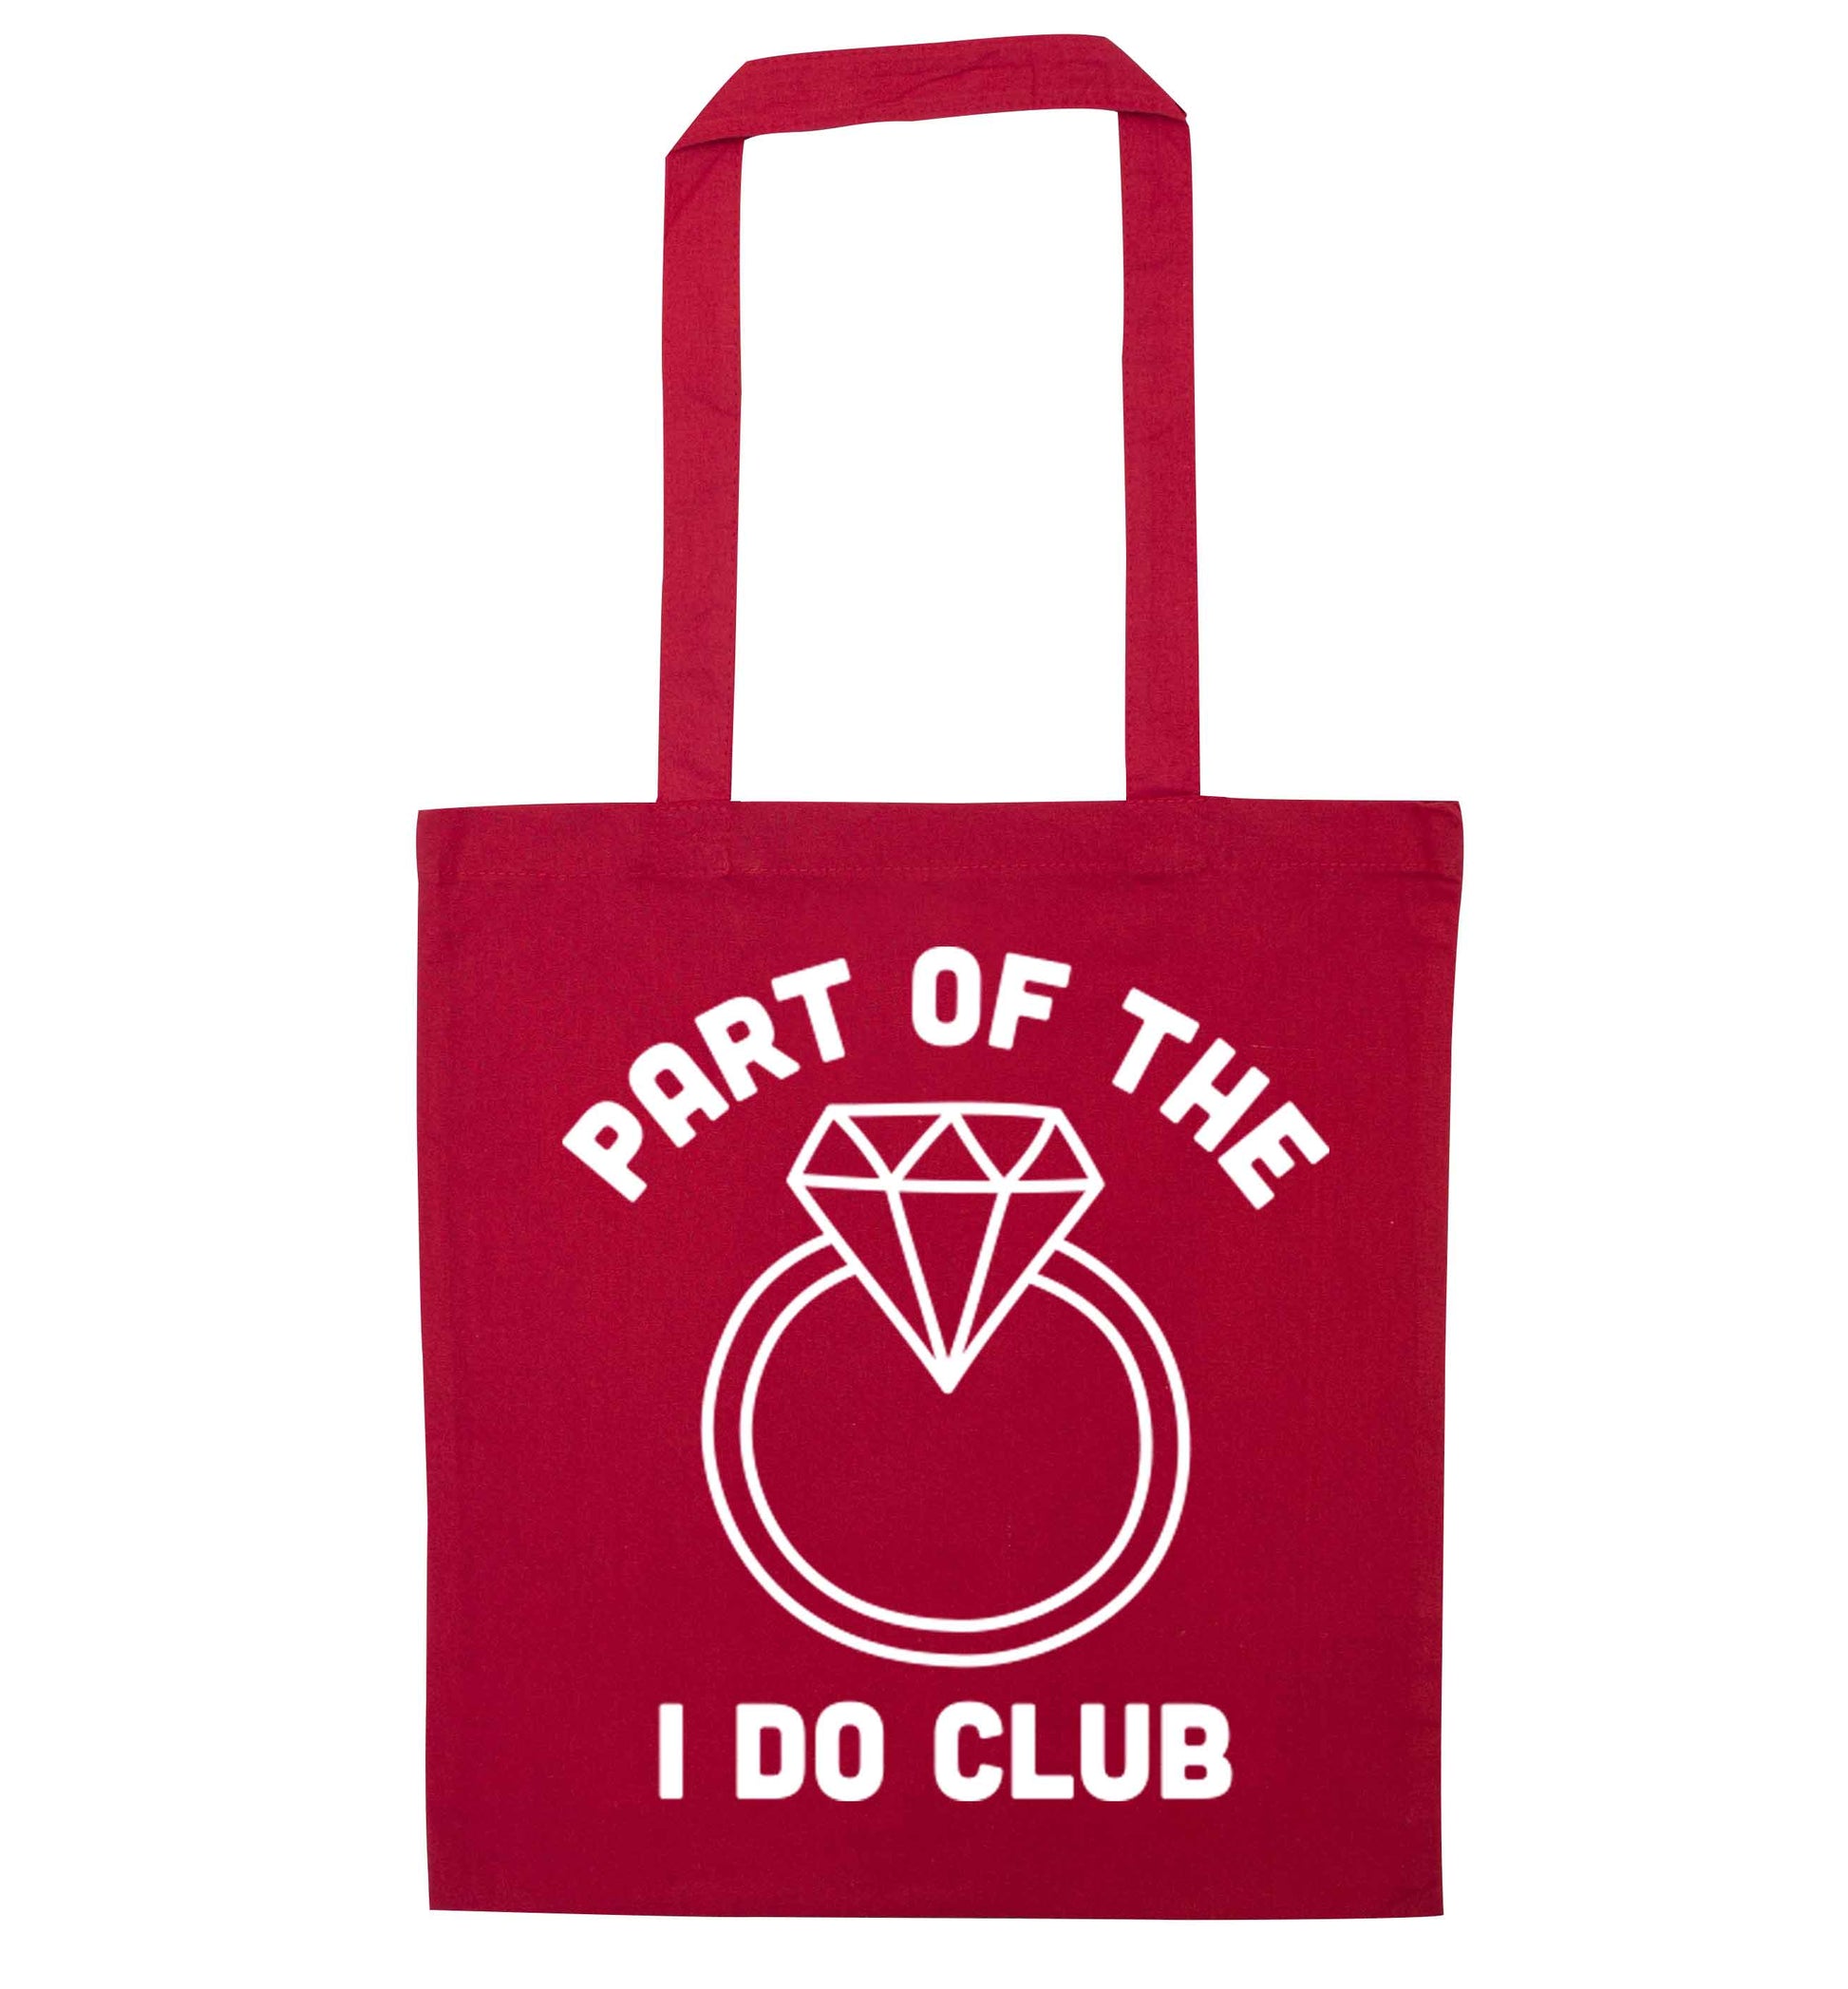 Part of the I do club red tote bag